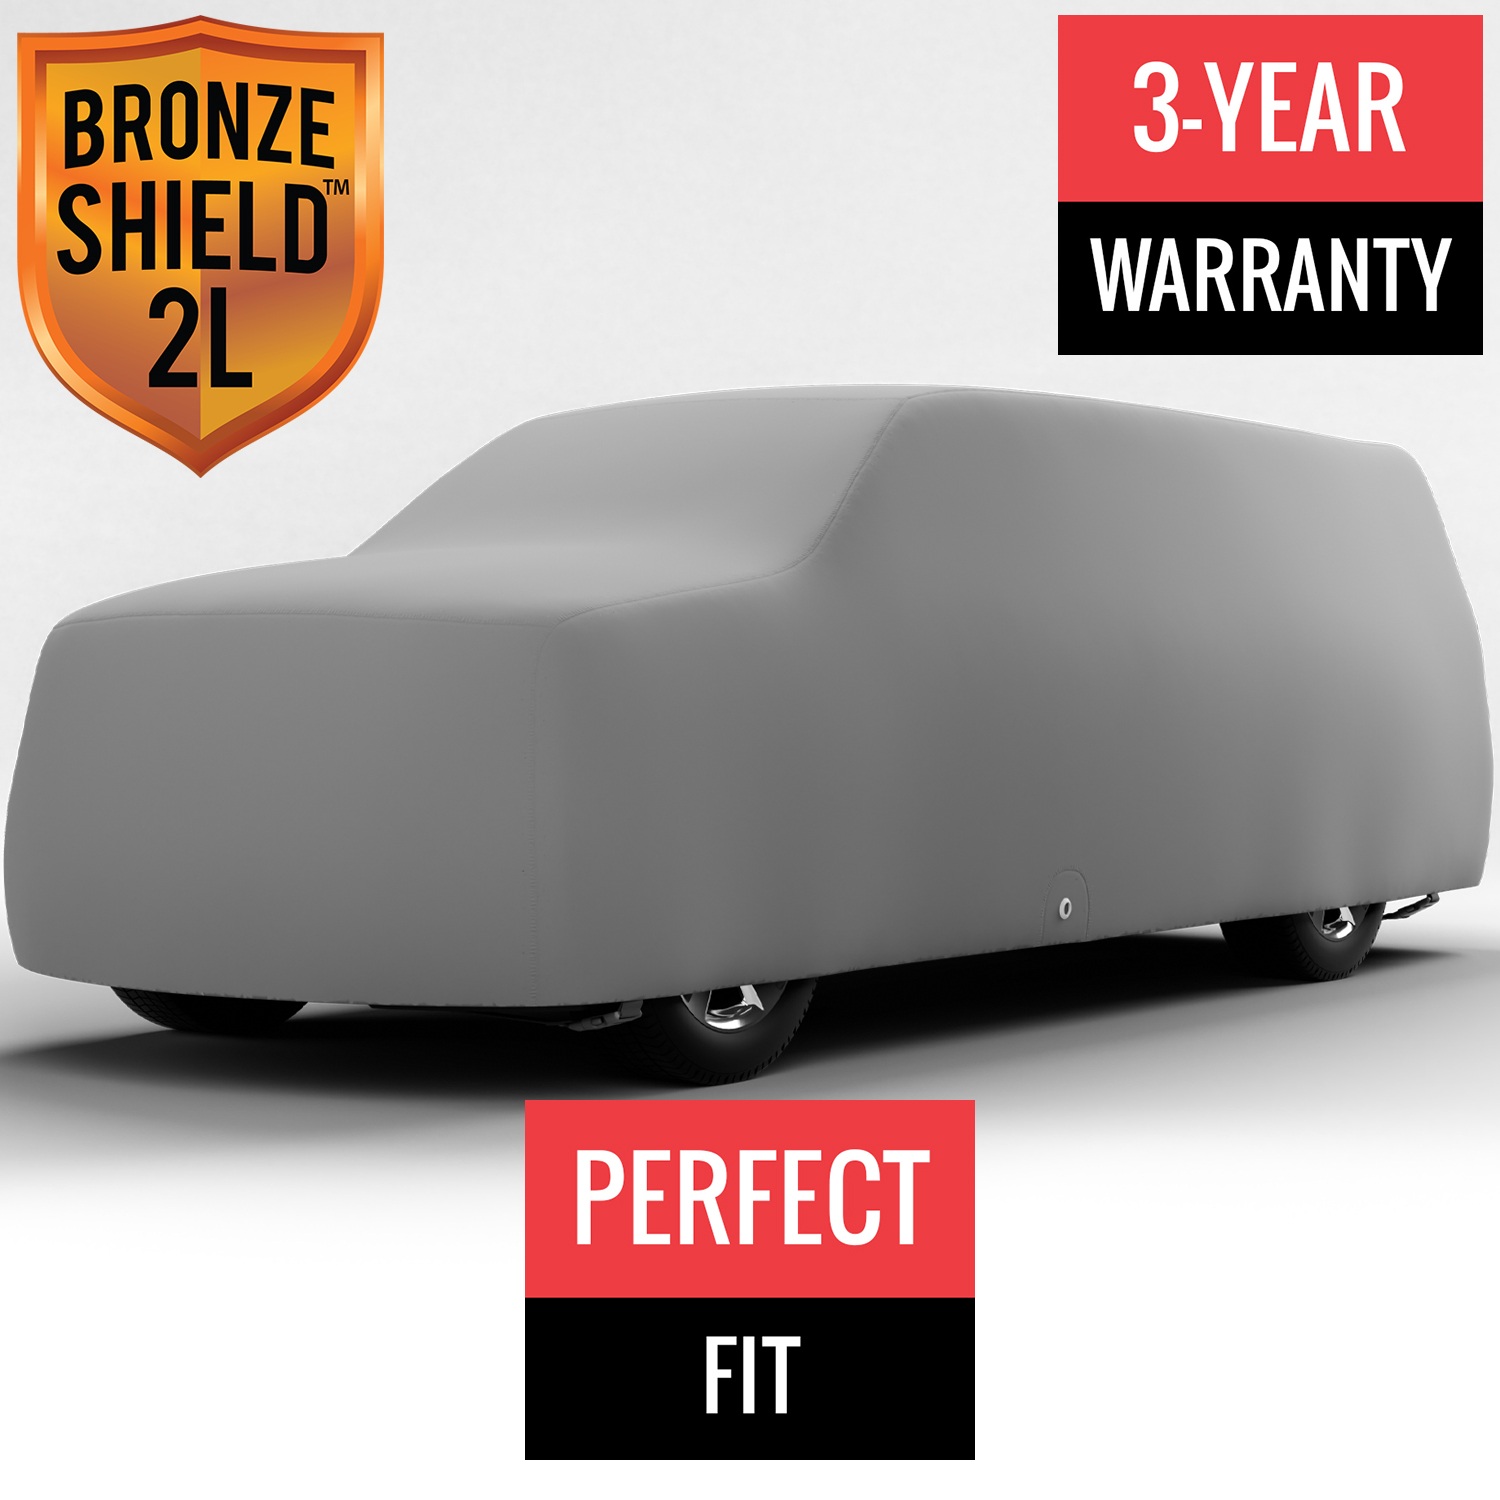 Bronze Shield 2L - Car Cover for Ford F-150 2015 Regular Cab Pickup 6.5 Feet Bed with Camper Shell